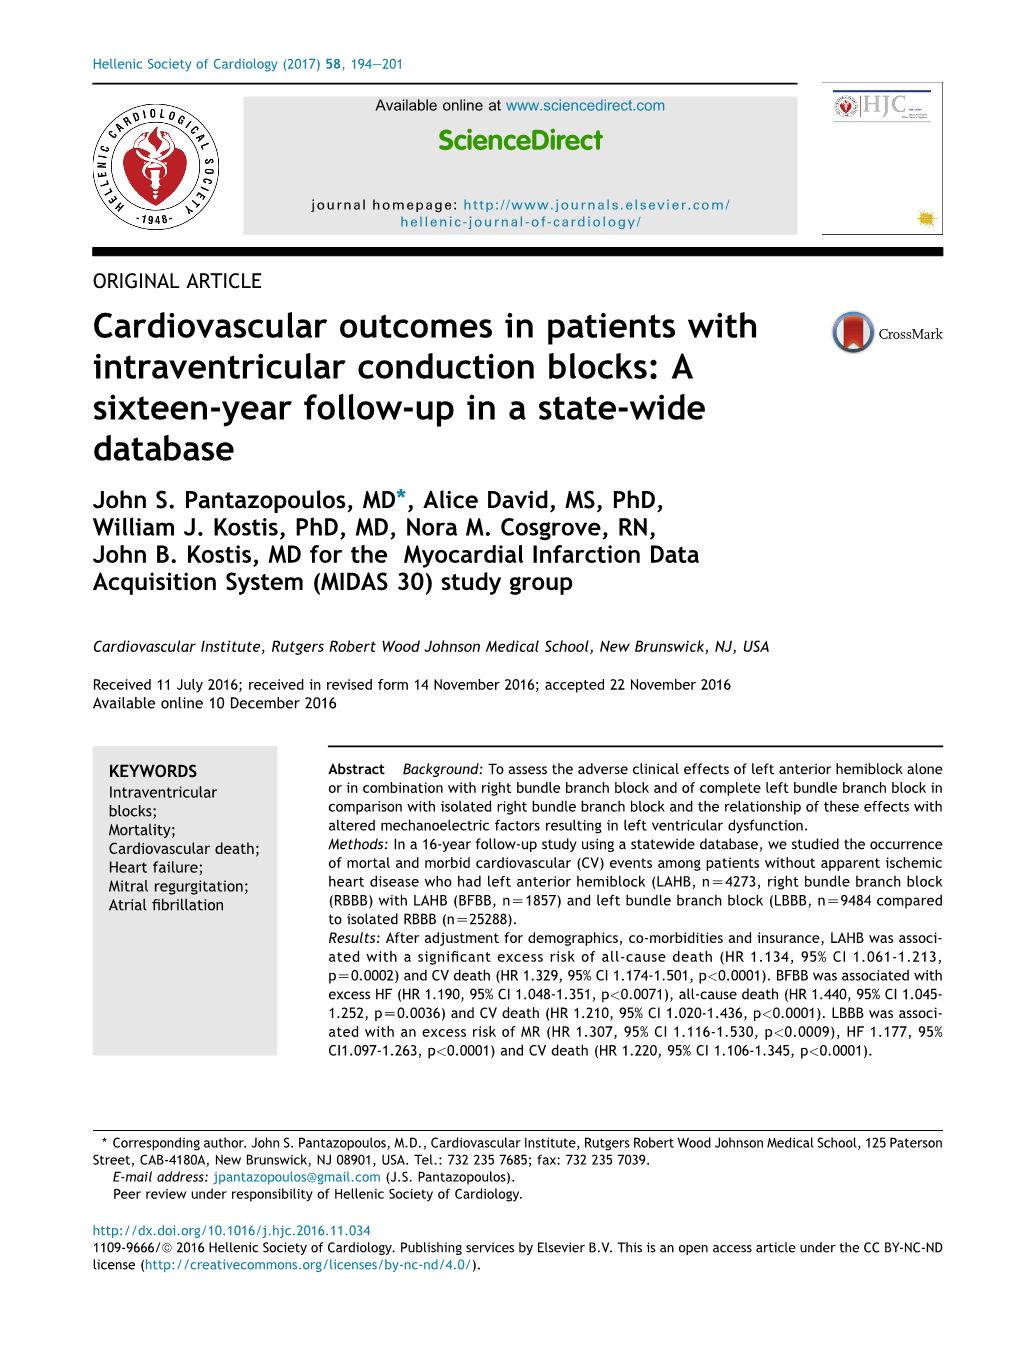 Cardiovascular Outcomes in Patients with Intraventricular Conduction Blocks: a Sixteen-Year Follow-Up in a State-Wide Database John S